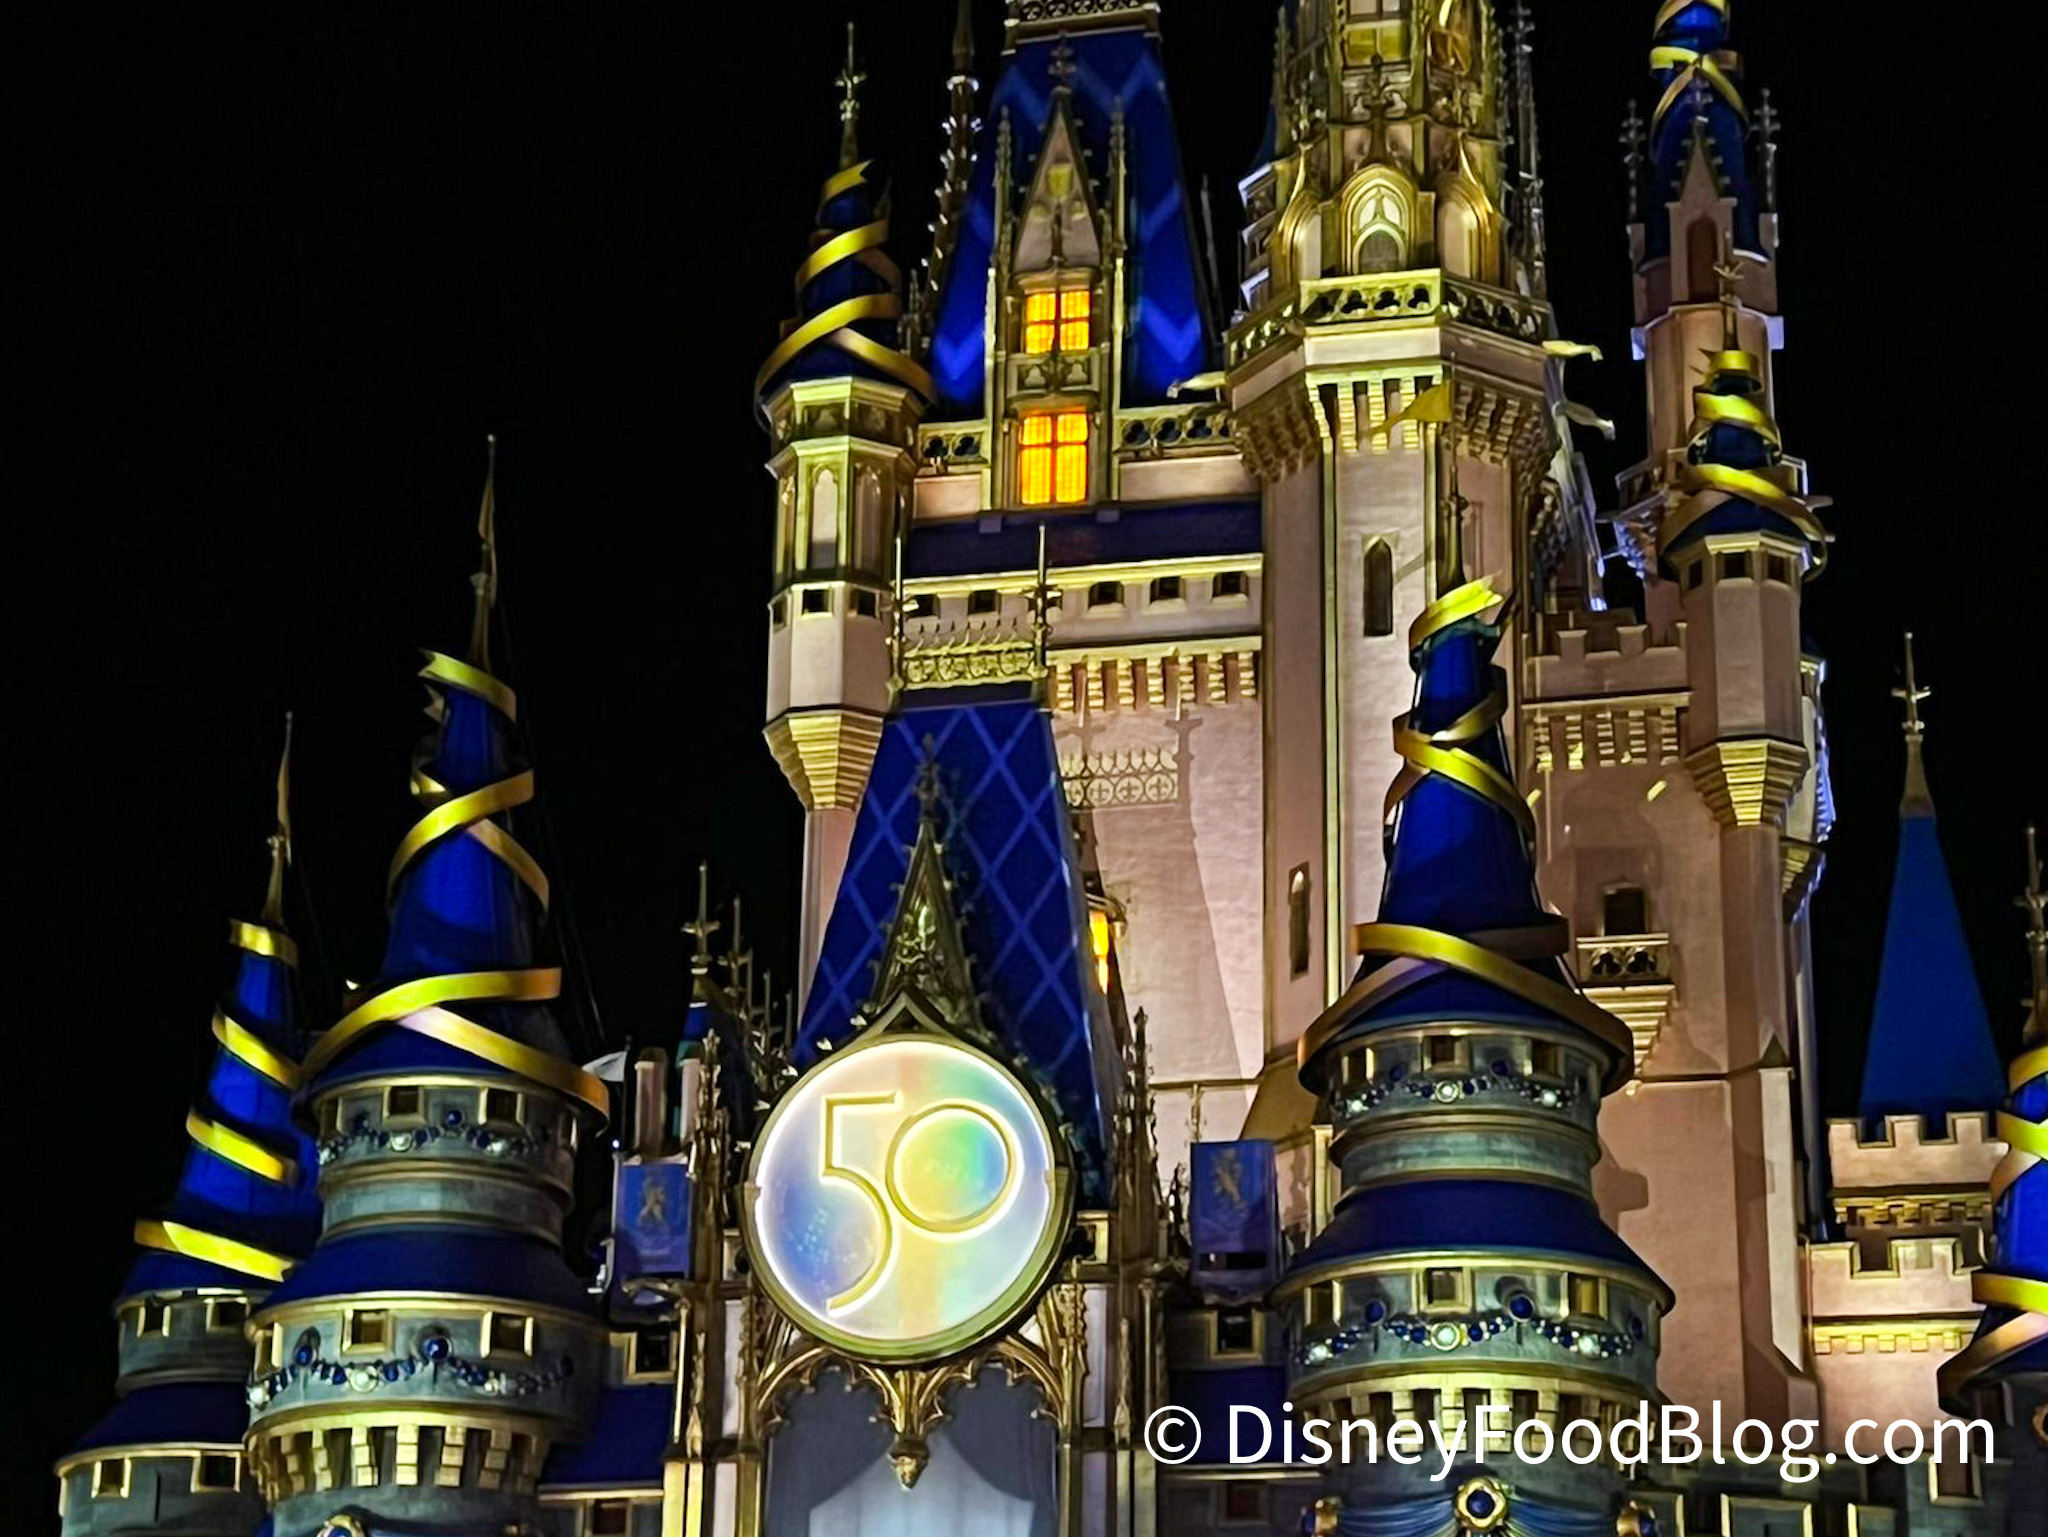 tangled castle at night